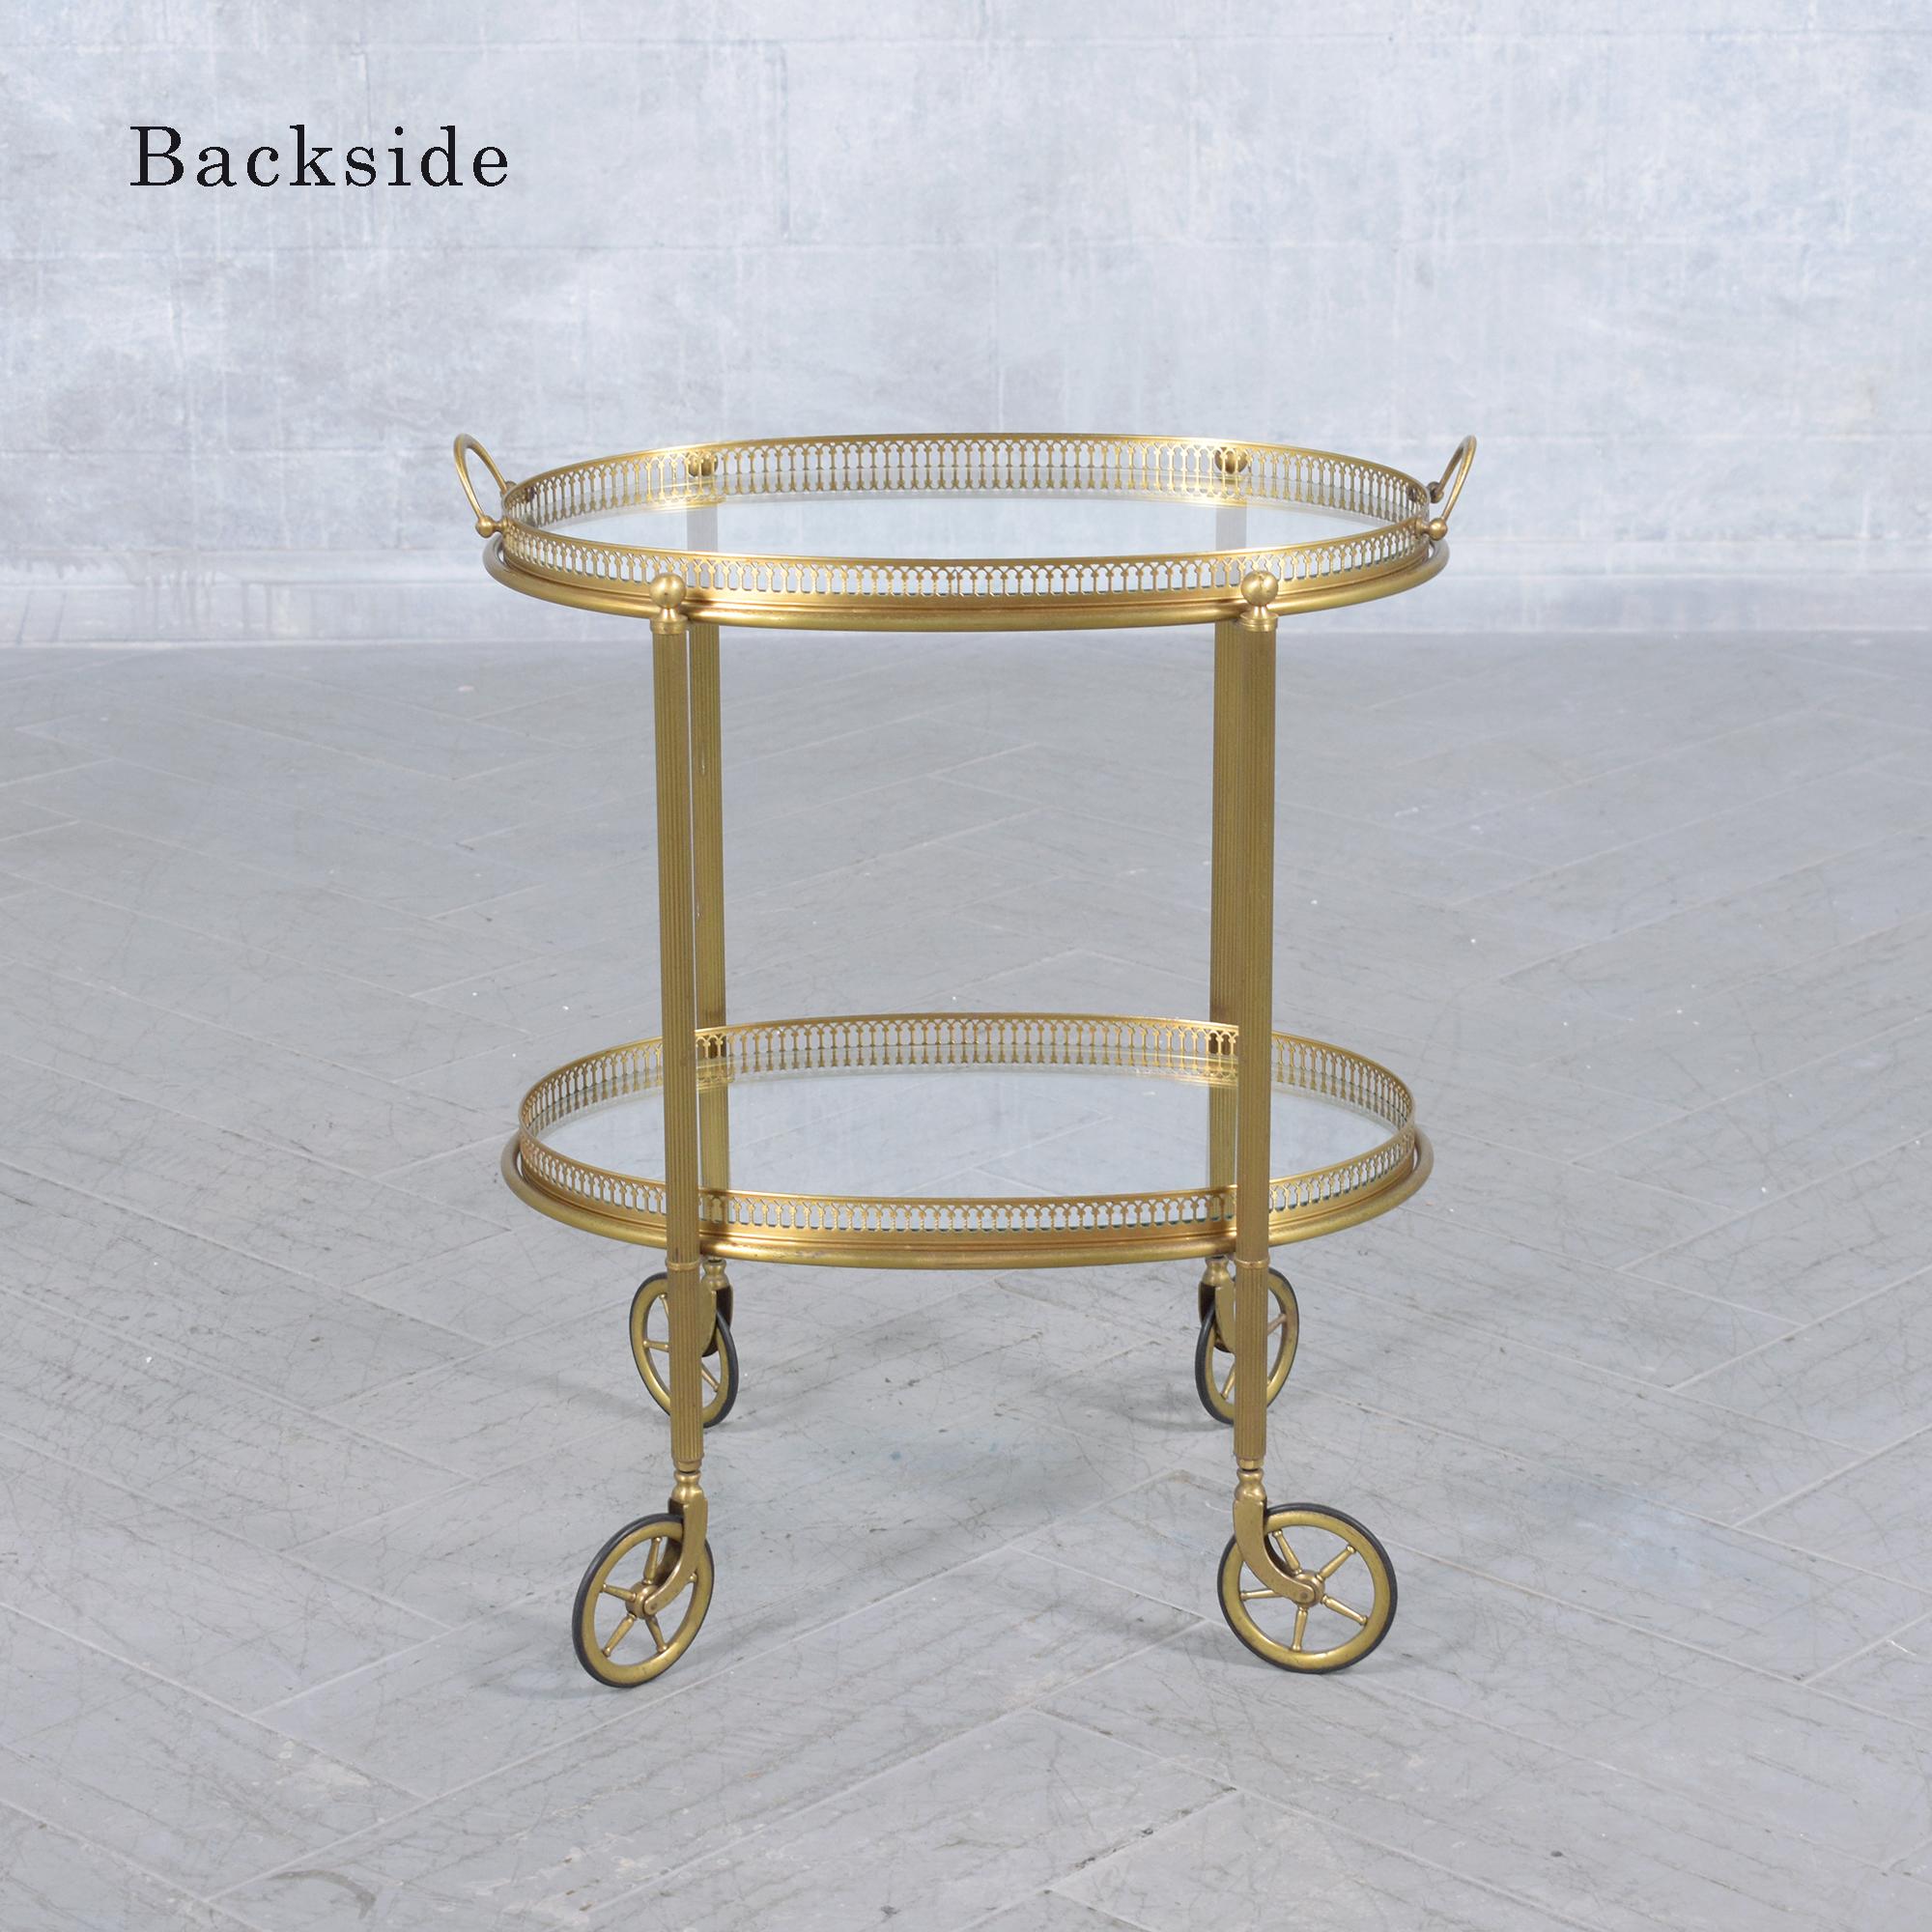 1960s Brass Bar Cart: Mid-Century Elegance Restored In Good Condition For Sale In Los Angeles, CA